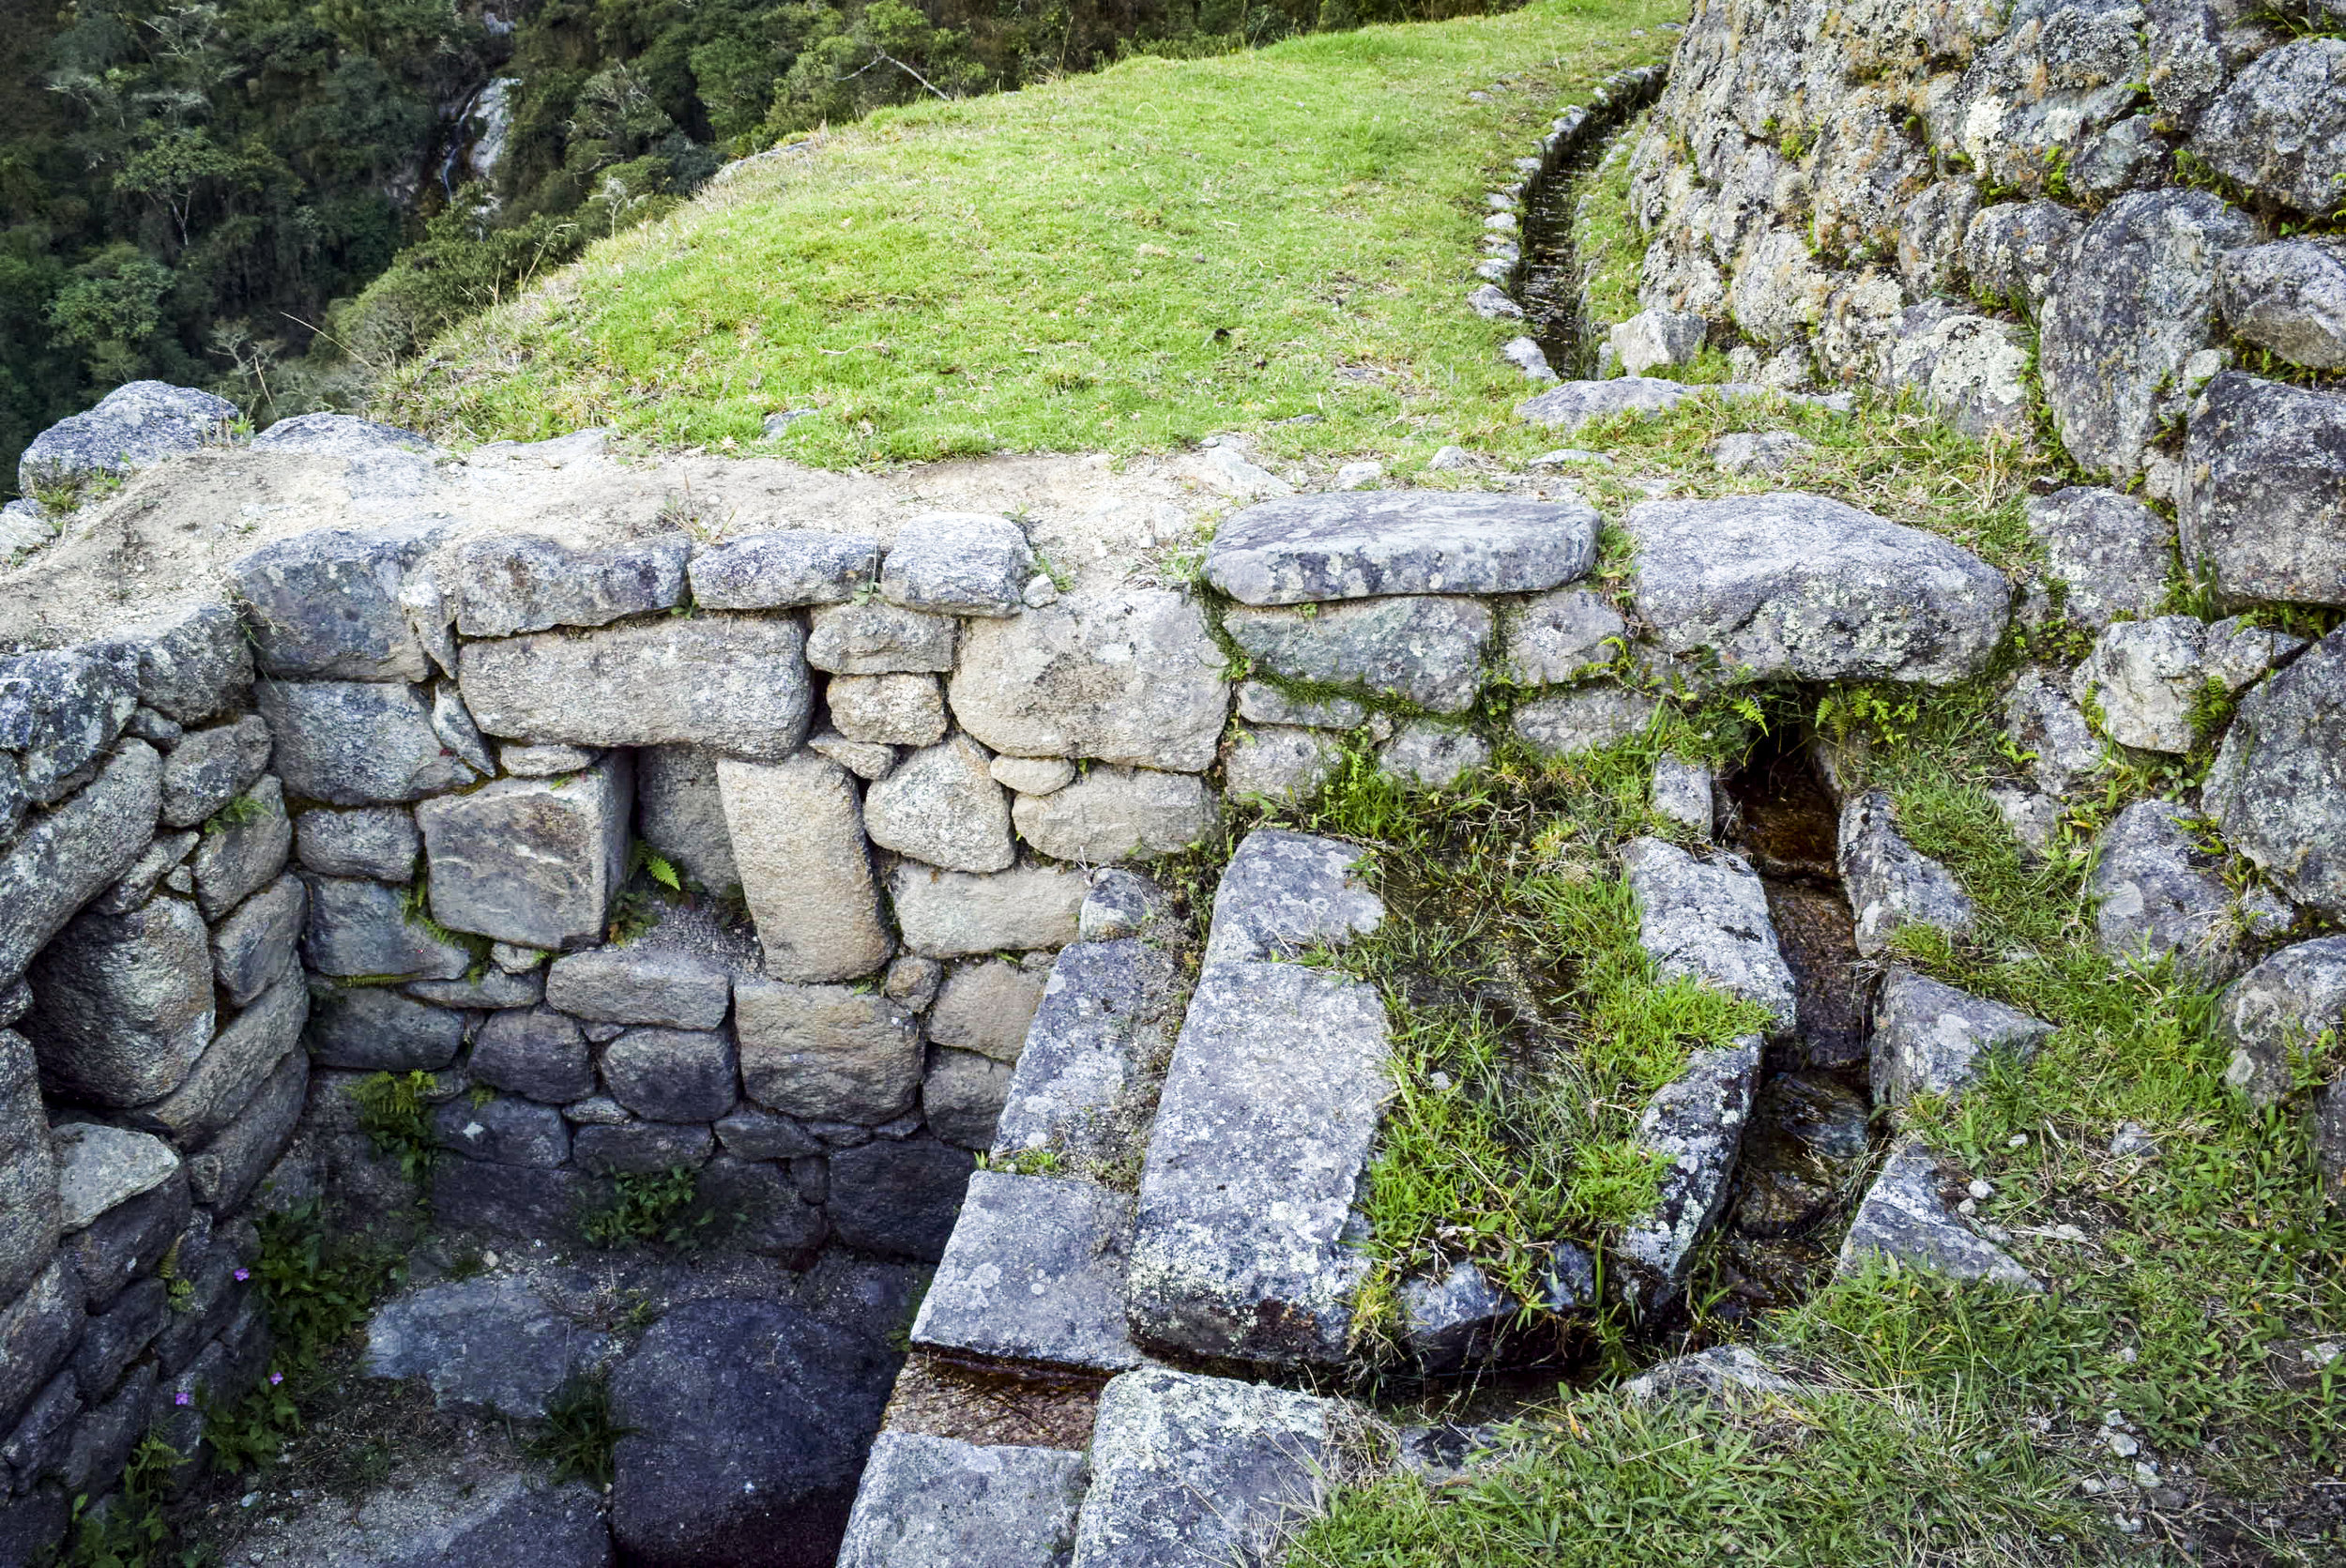 Incan Water System